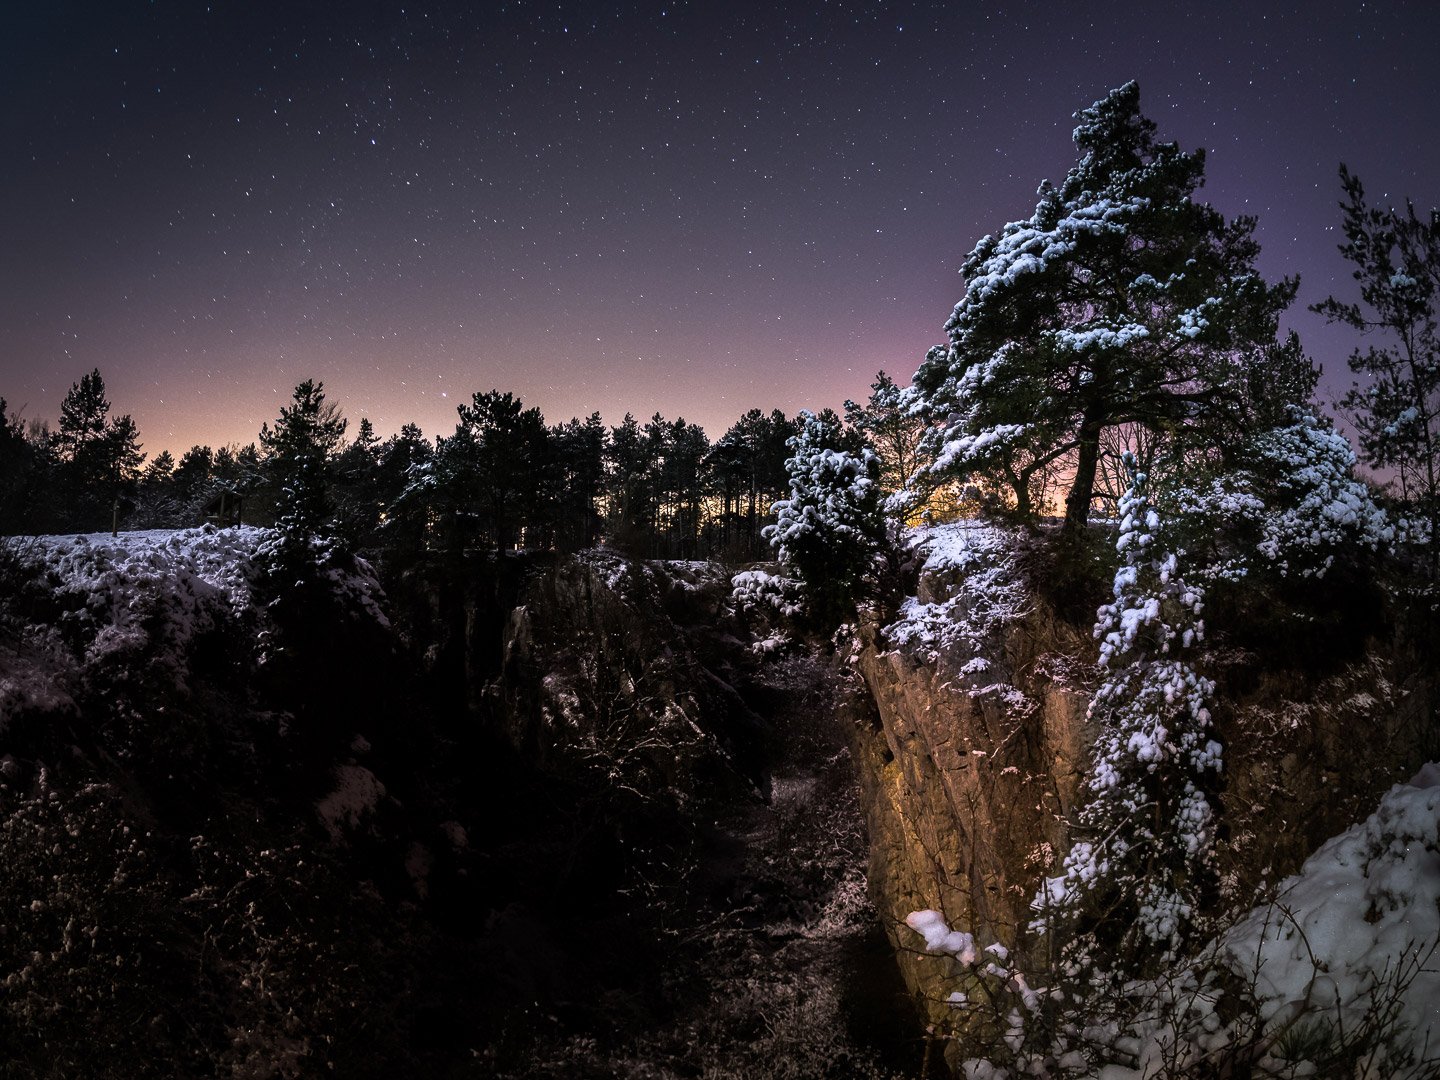 A winter night landscape with trees and snow and a dusk sky with pinpoint stars